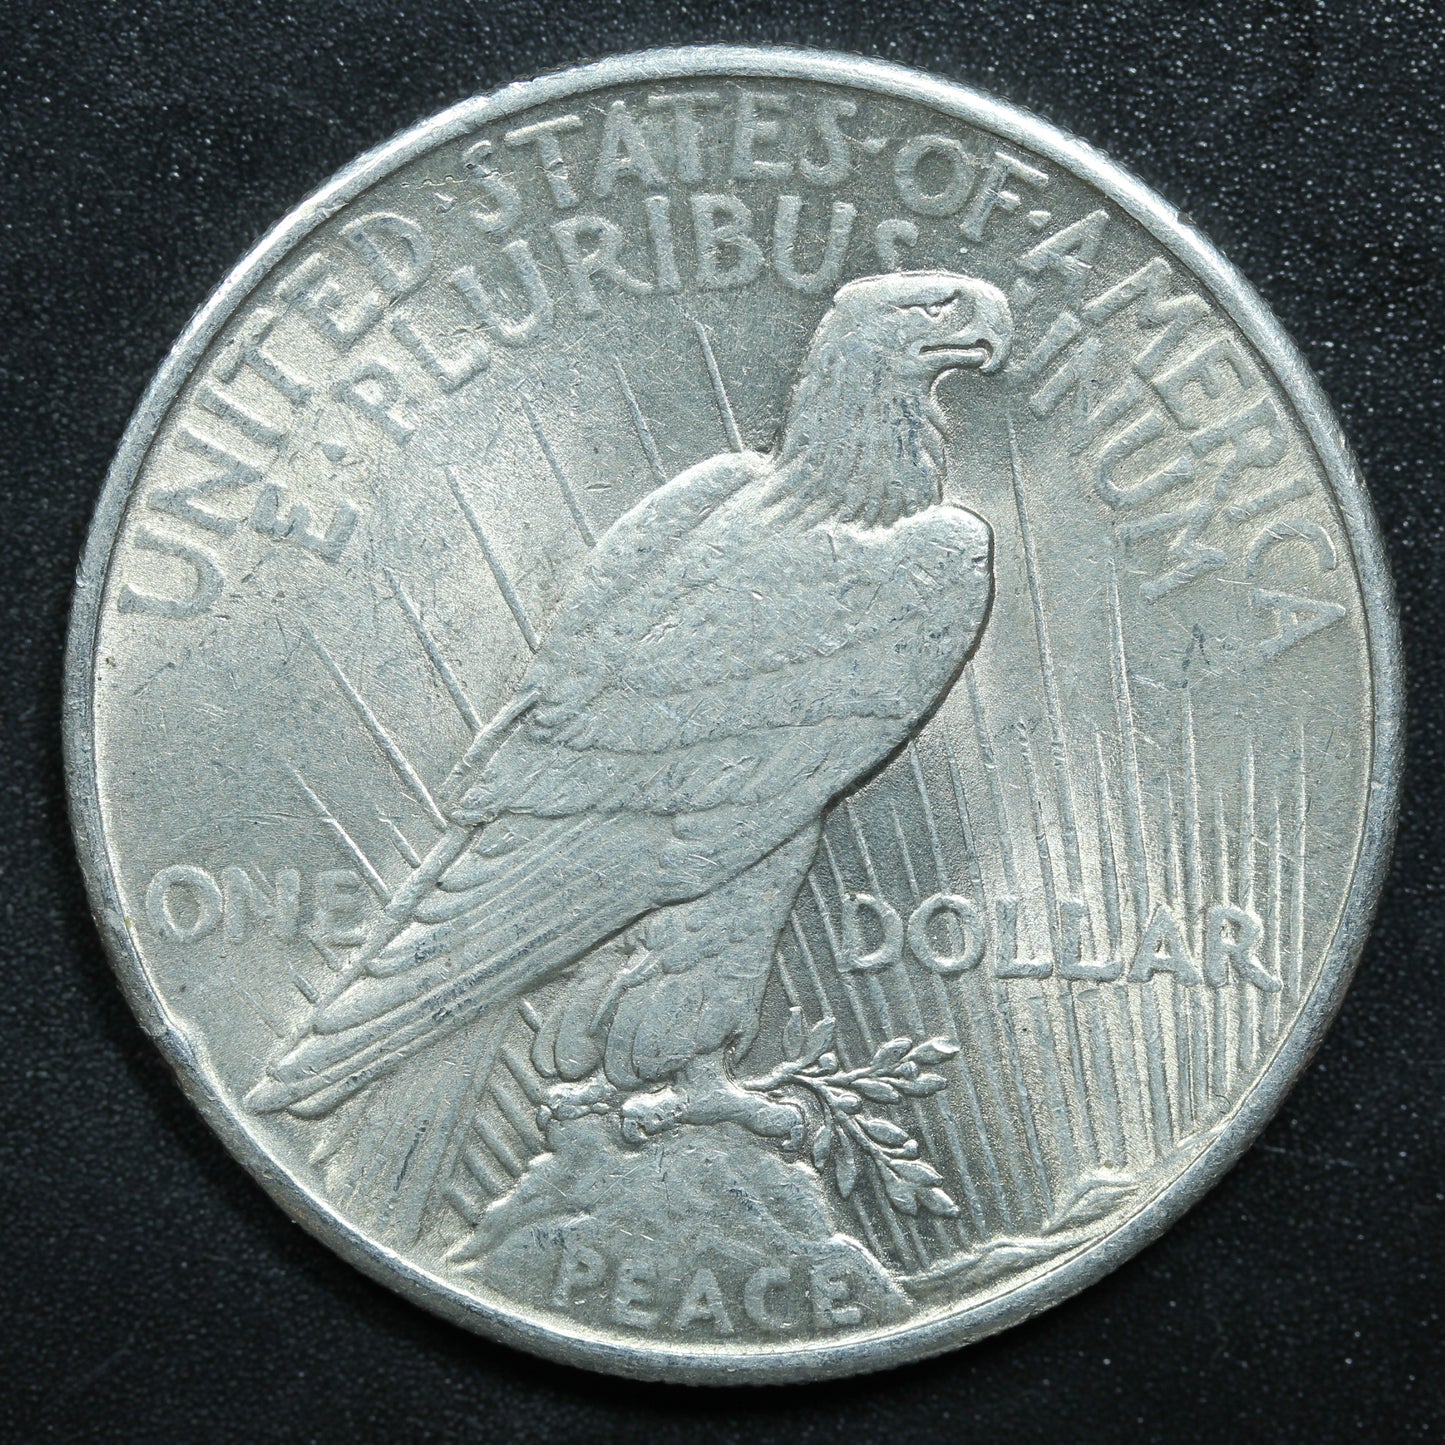 1924 Peace Dollar - Silver - Philadelphia - Exact Coin Pictured